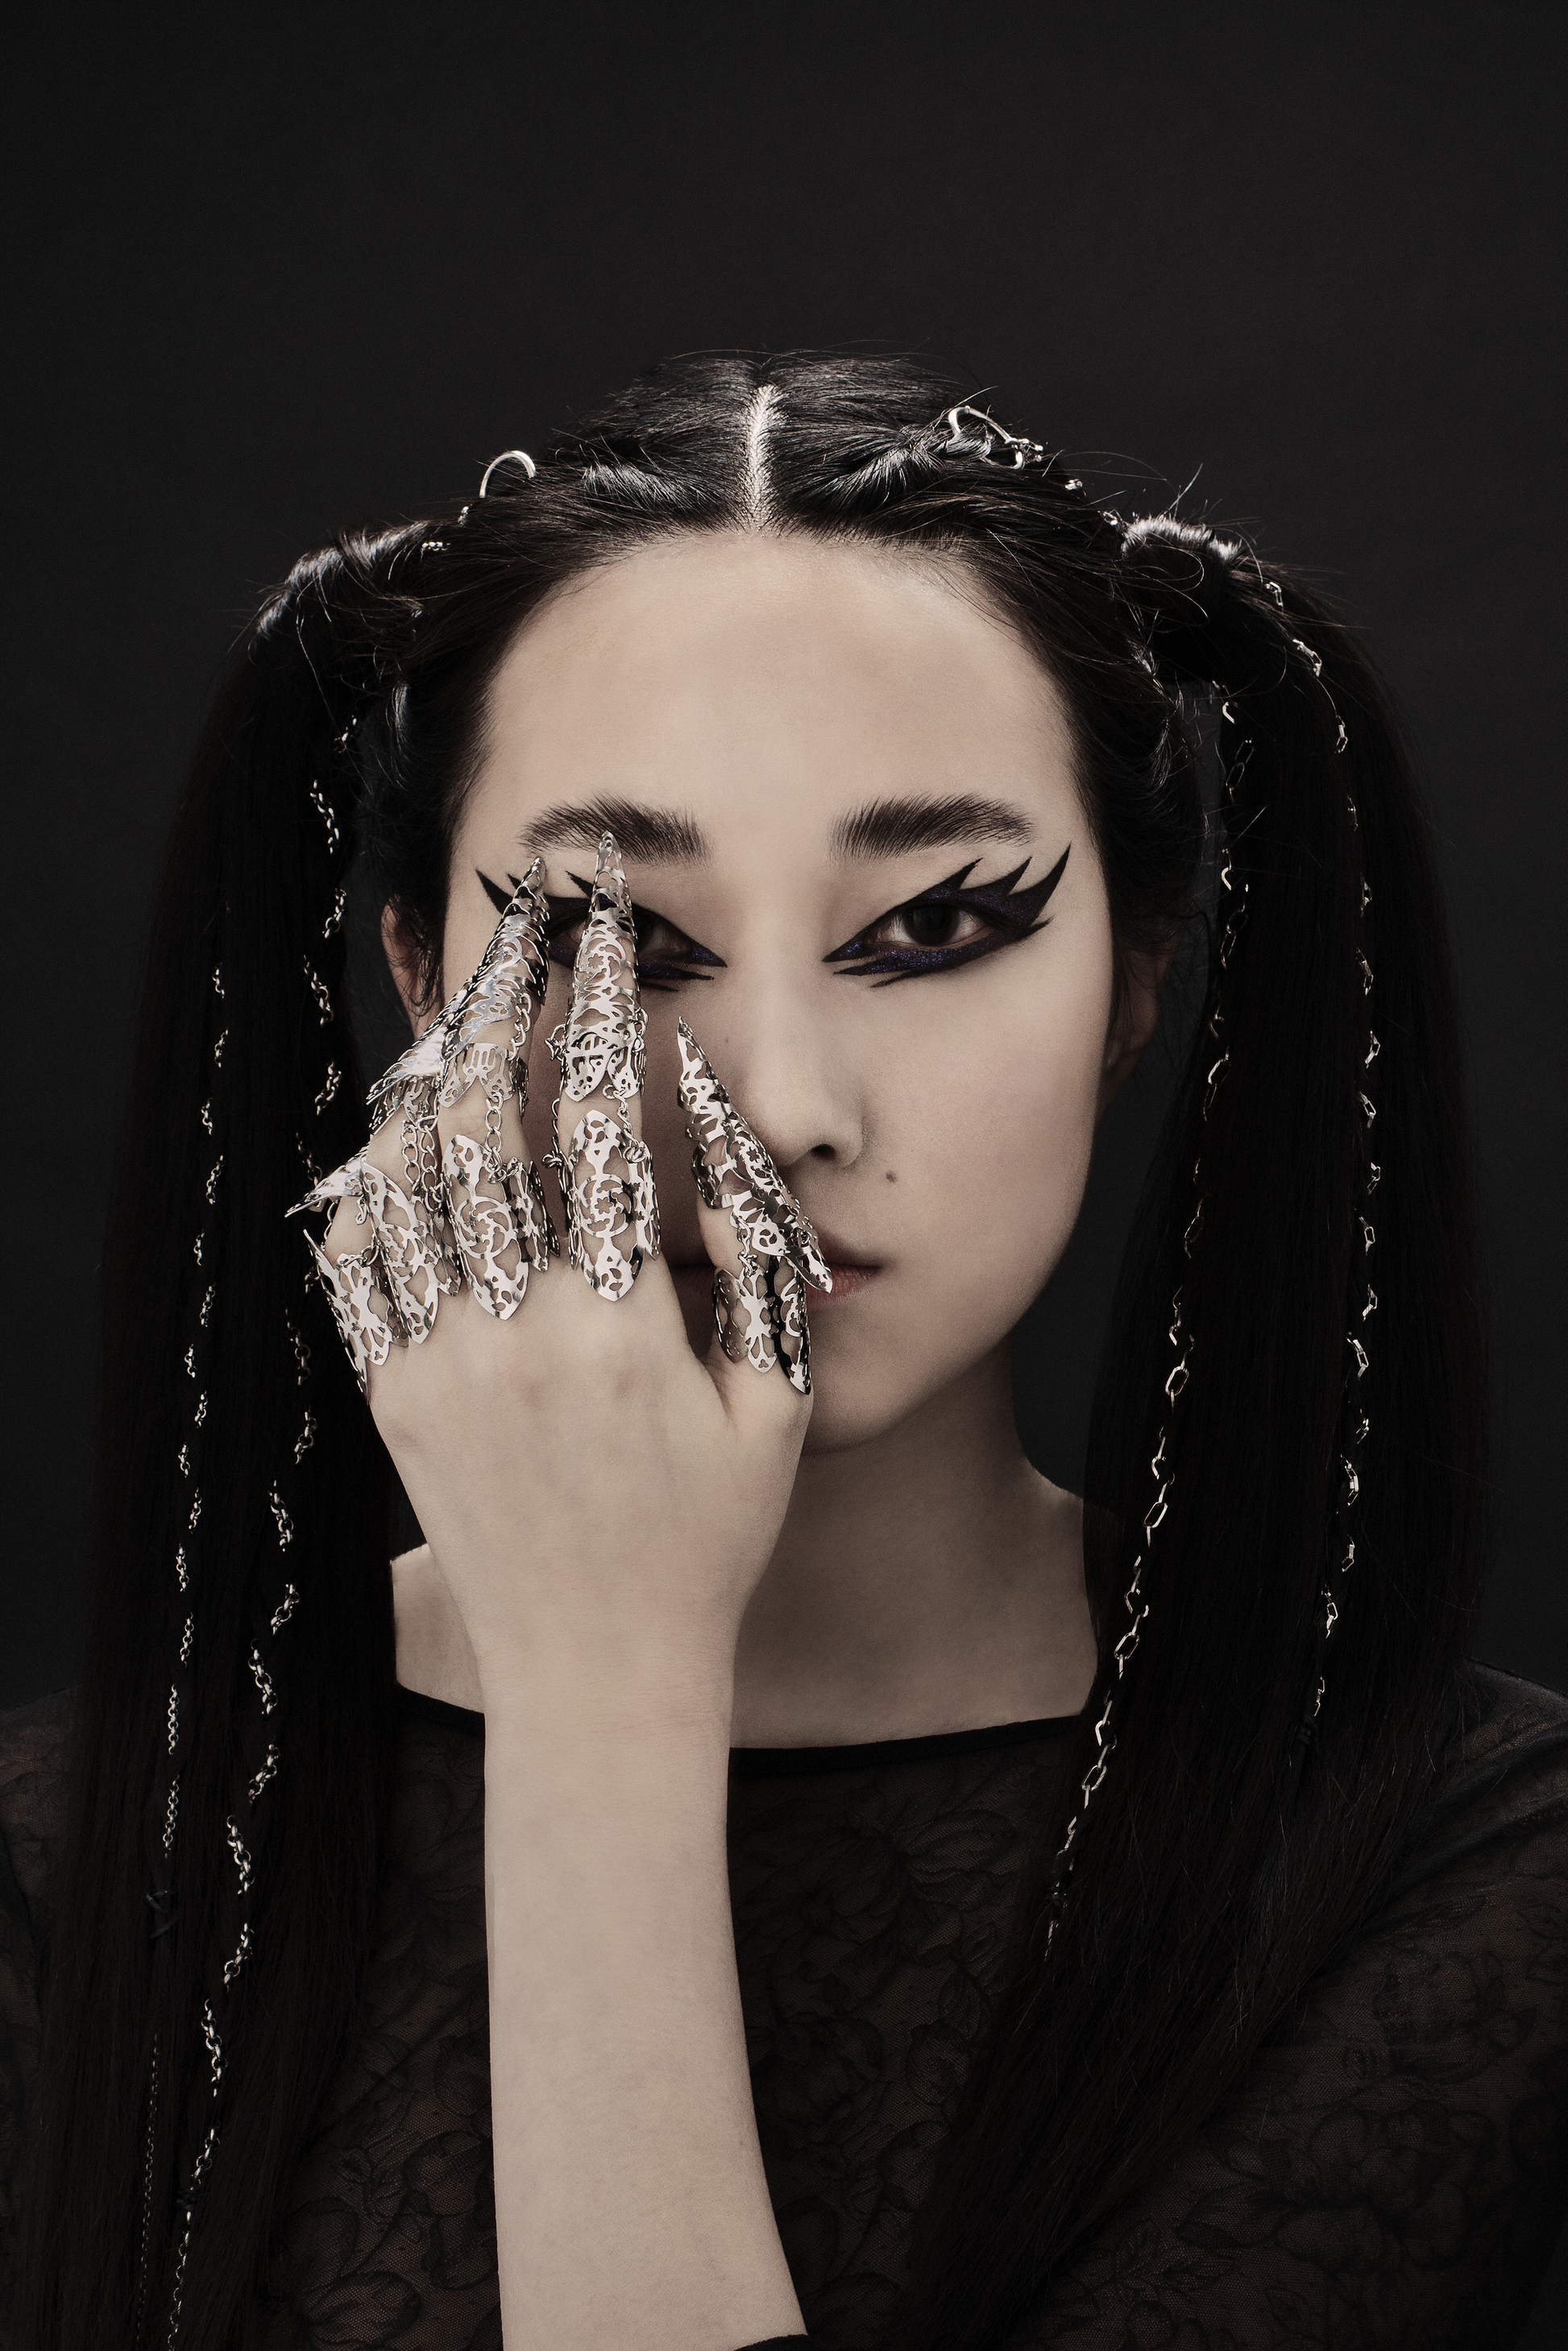 In the photo, a person exhibits a full hand of elaborately designed full-finger claw rings, exemplifying Myril Jewels' signature neo-goth style. These silver rings, perfect for Halloween or as a daring punk accessory, embody the gothic-chic and whimsigoth aesthetic. They are ideal for witchcore enthusiasts, make a bold statement at raves or festivals, and are an exceptional gift for those who favor unique, dark avant-garde jewelry.